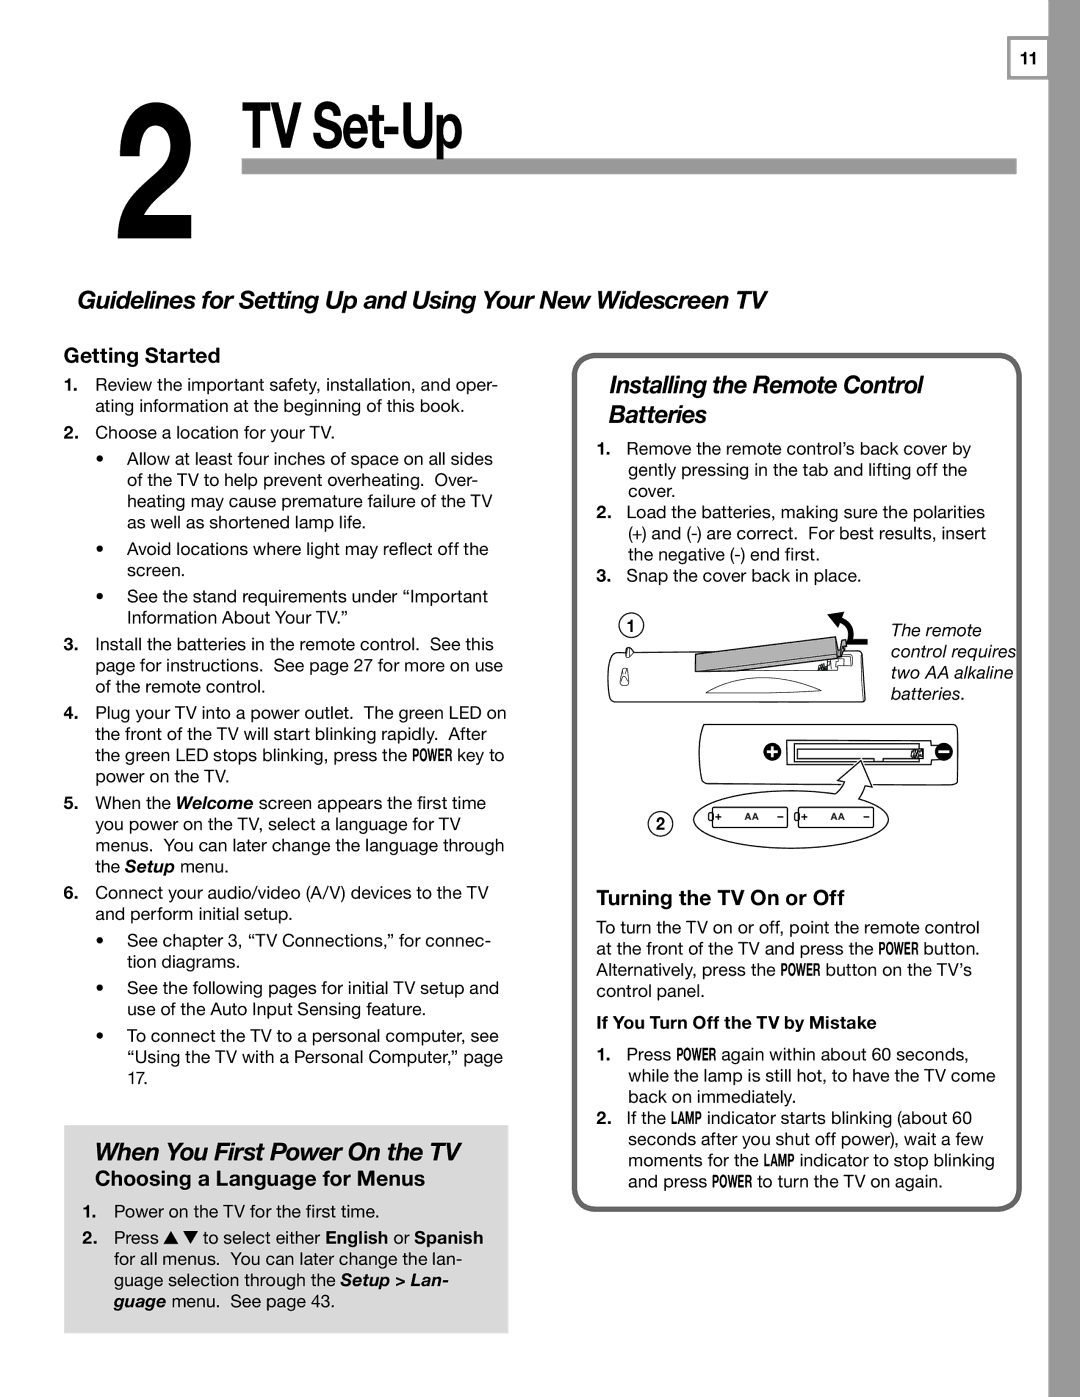 Mitsubishi Electronics WD-60C8 Guidelines for Setting Up and Using Your New Widescreen TV, When You First Power On the TV 